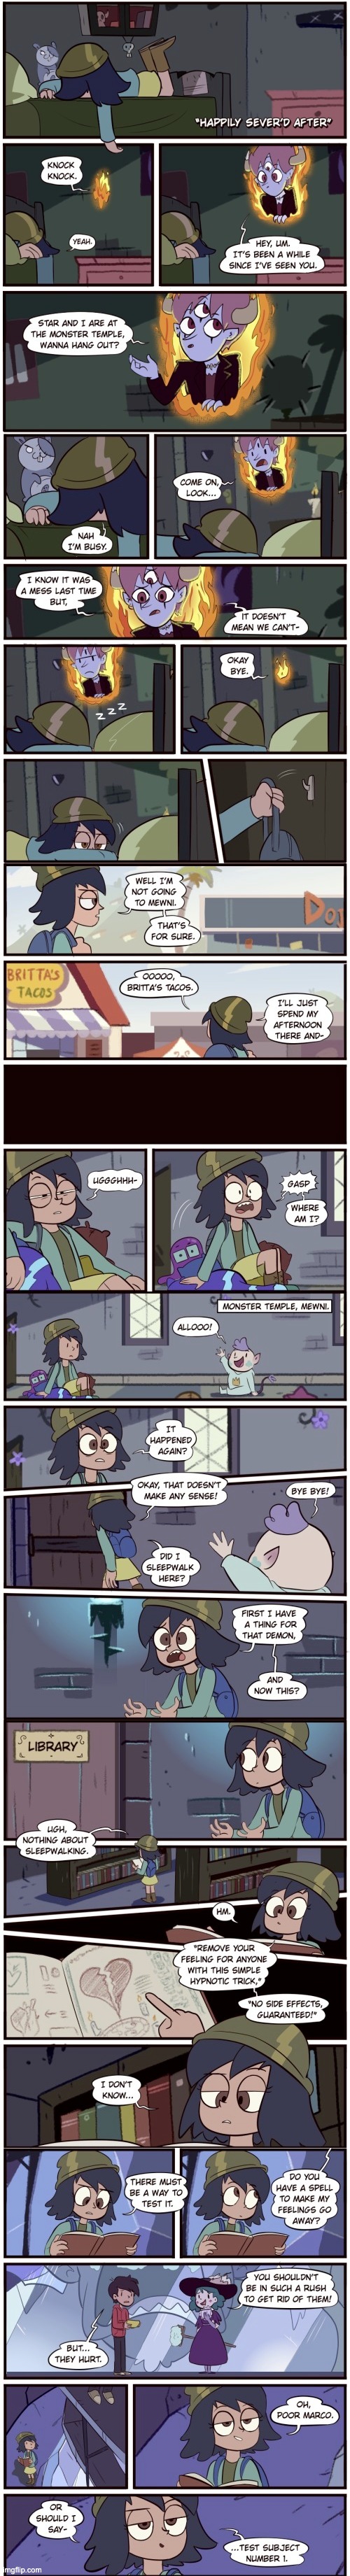 Tom vs Jannanigans: Happily Sever’d After (Part 1) | image tagged in morningmark,comics/cartoons,svtfoe,star vs the forces of evil,comics,memes | made w/ Imgflip meme maker